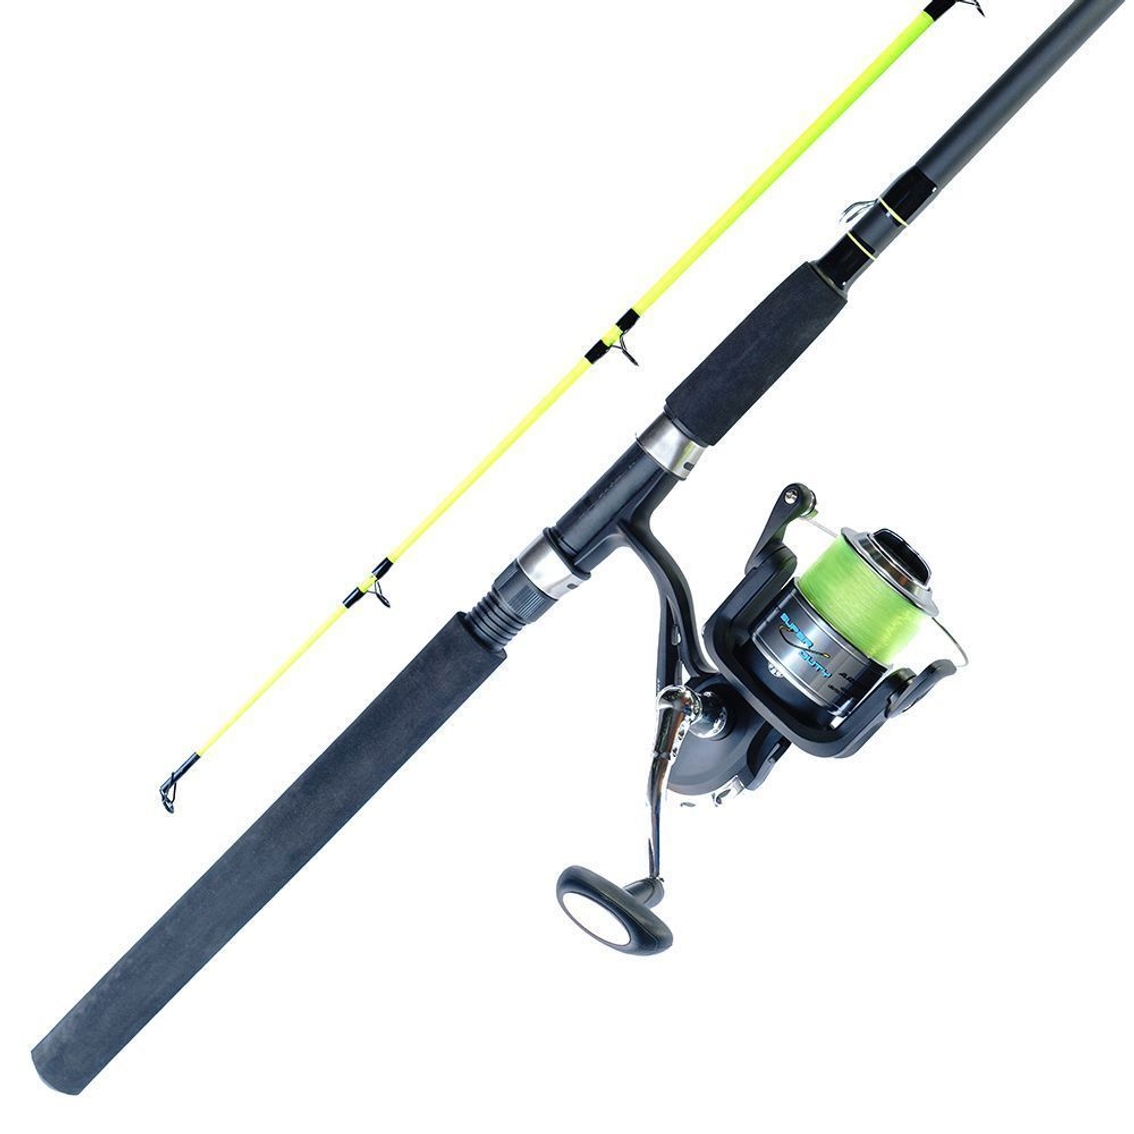 Super Duty Spinning Combo 5000 size reel with a 7 foot 6 inch Lumi Glow tip - Image 3 of 3